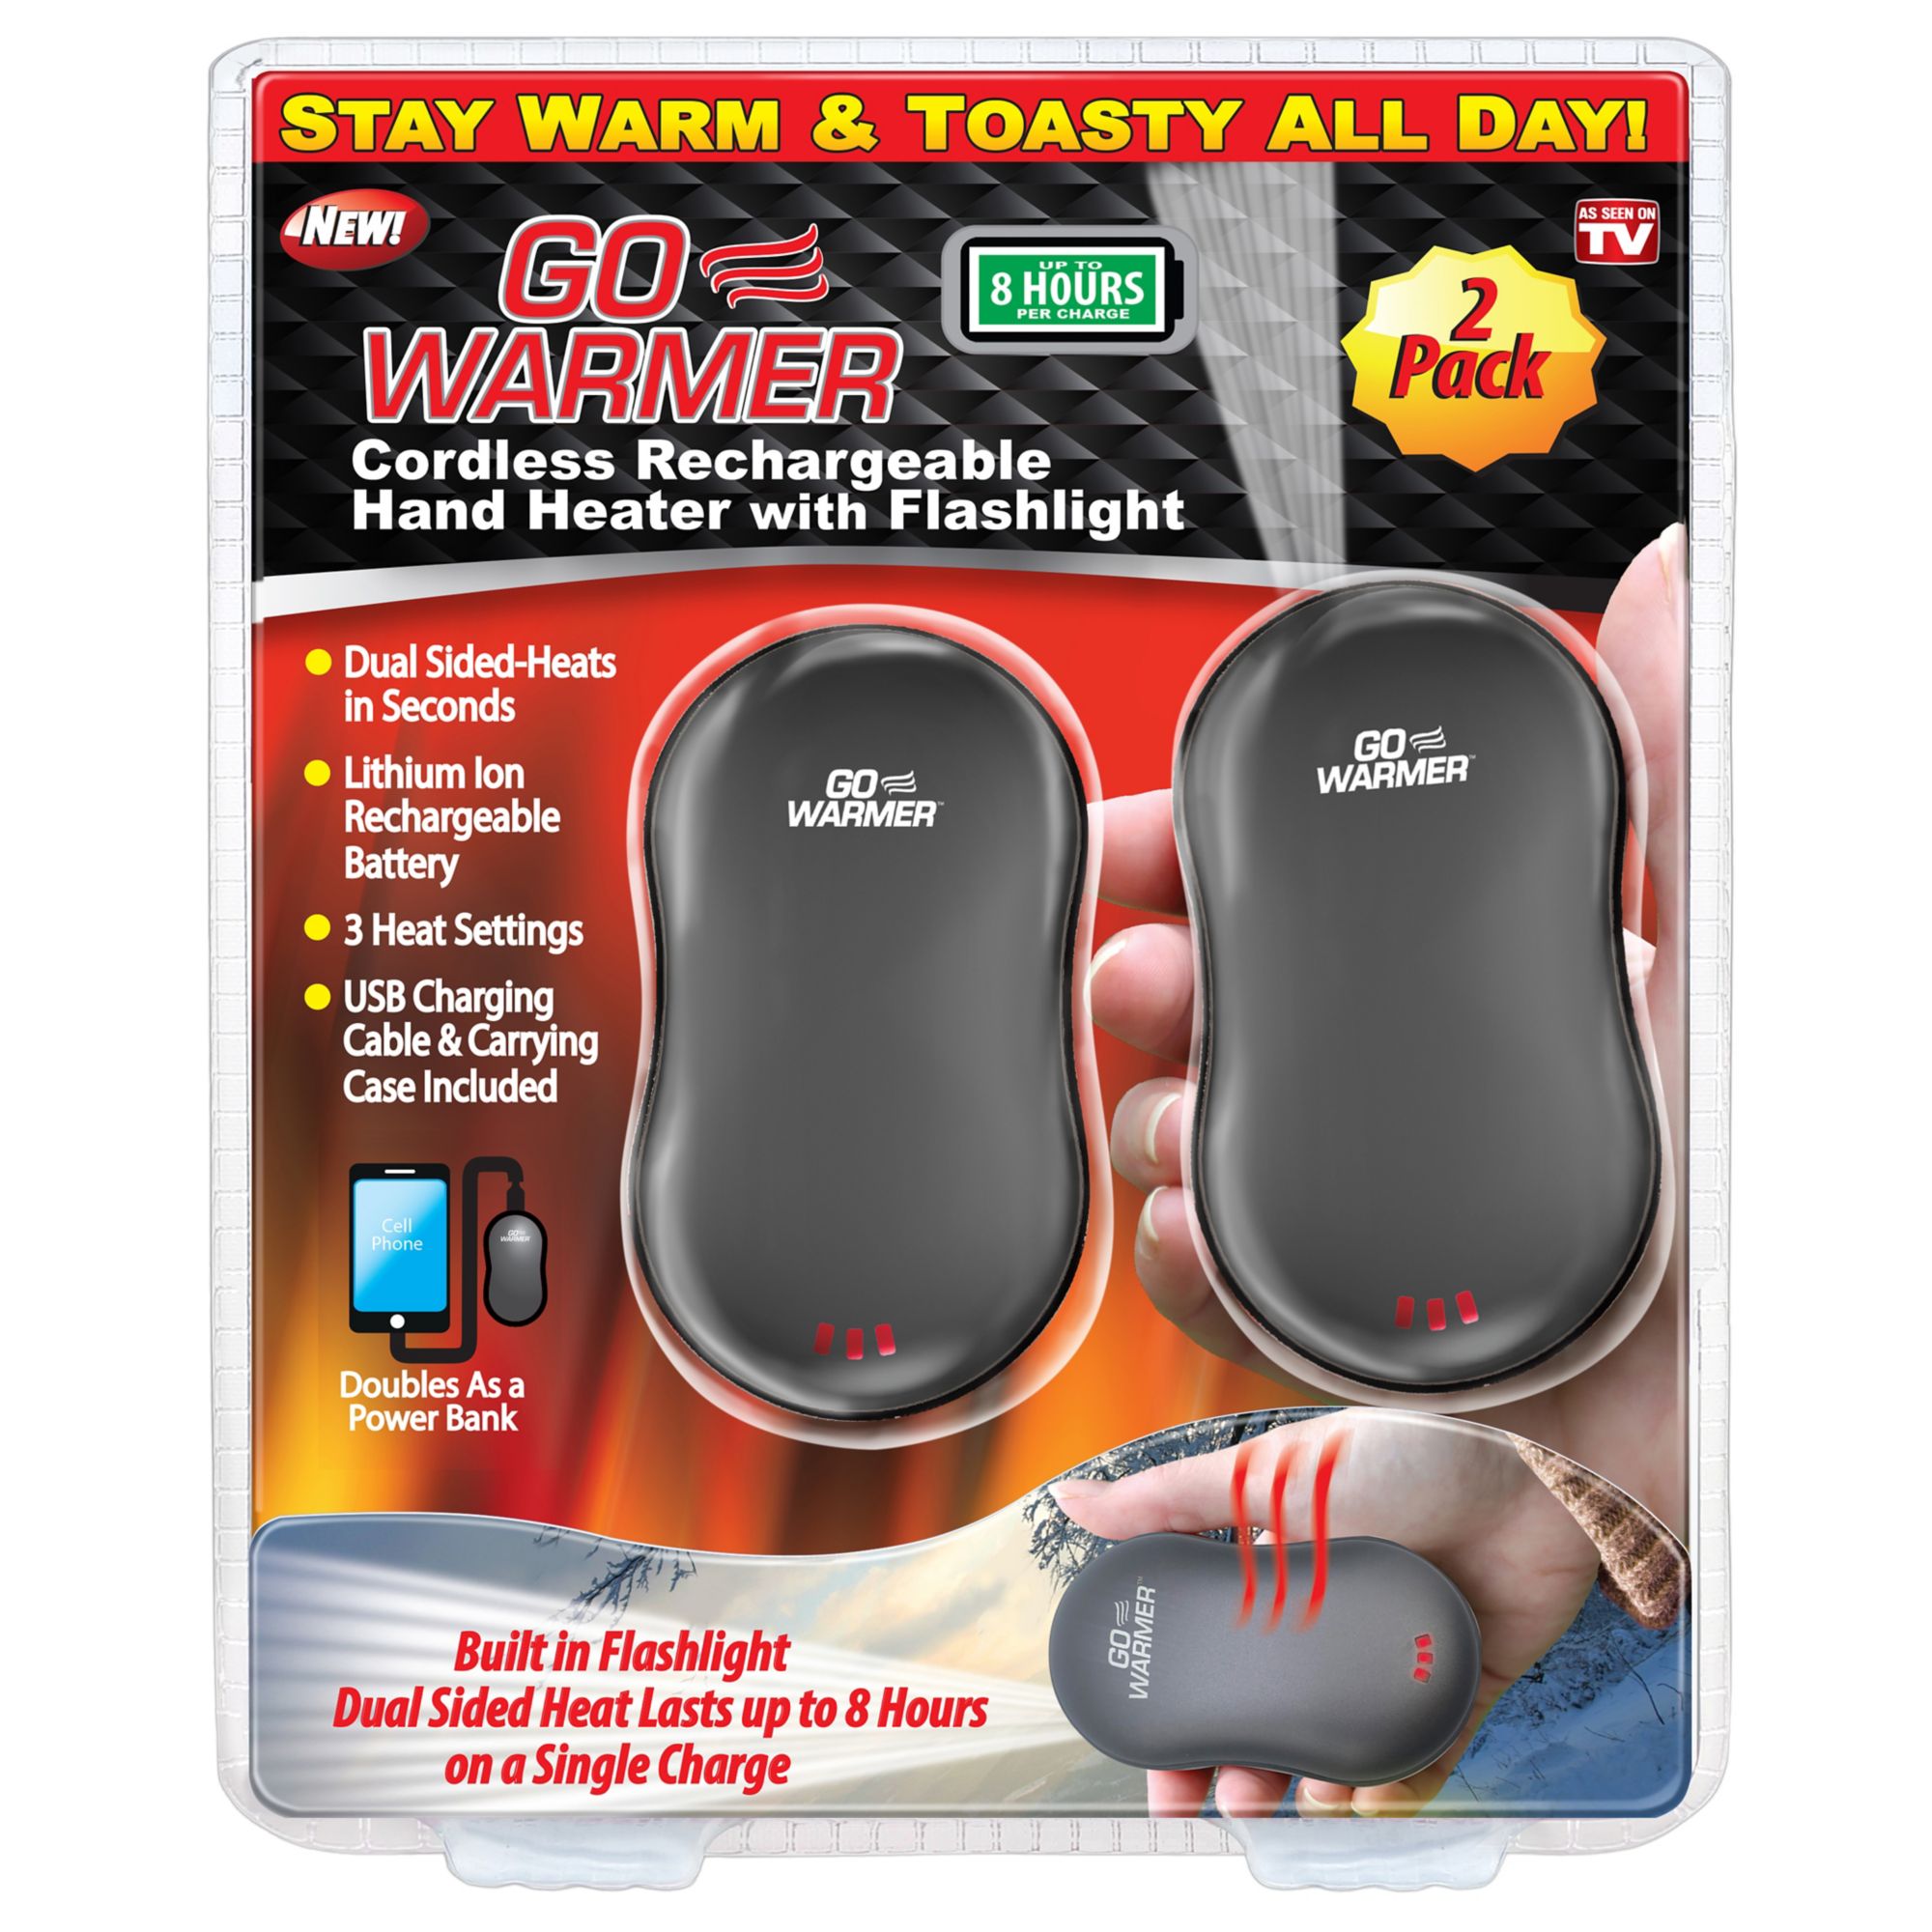 Go Warmer Cordless Rechargeable Hand Heater / Power Bank New